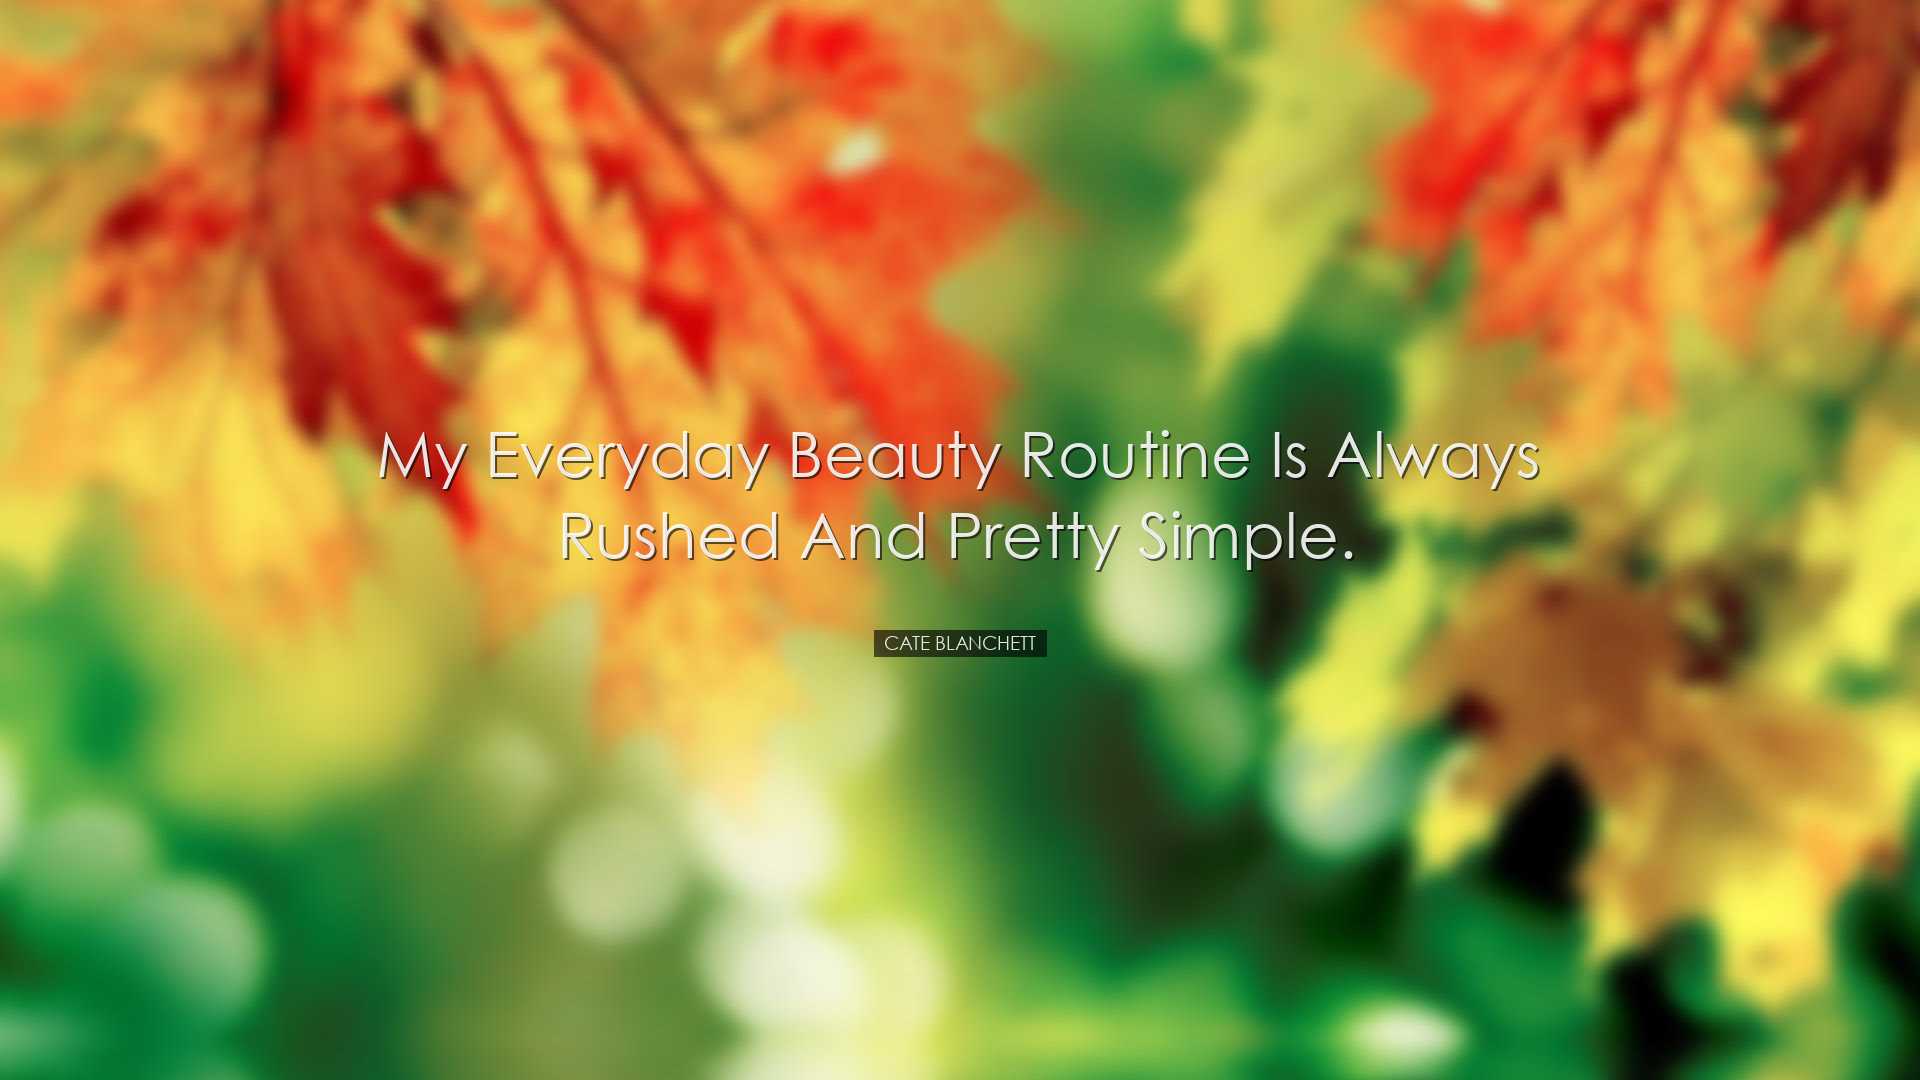 My everyday beauty routine is always rushed and pretty simple. - C